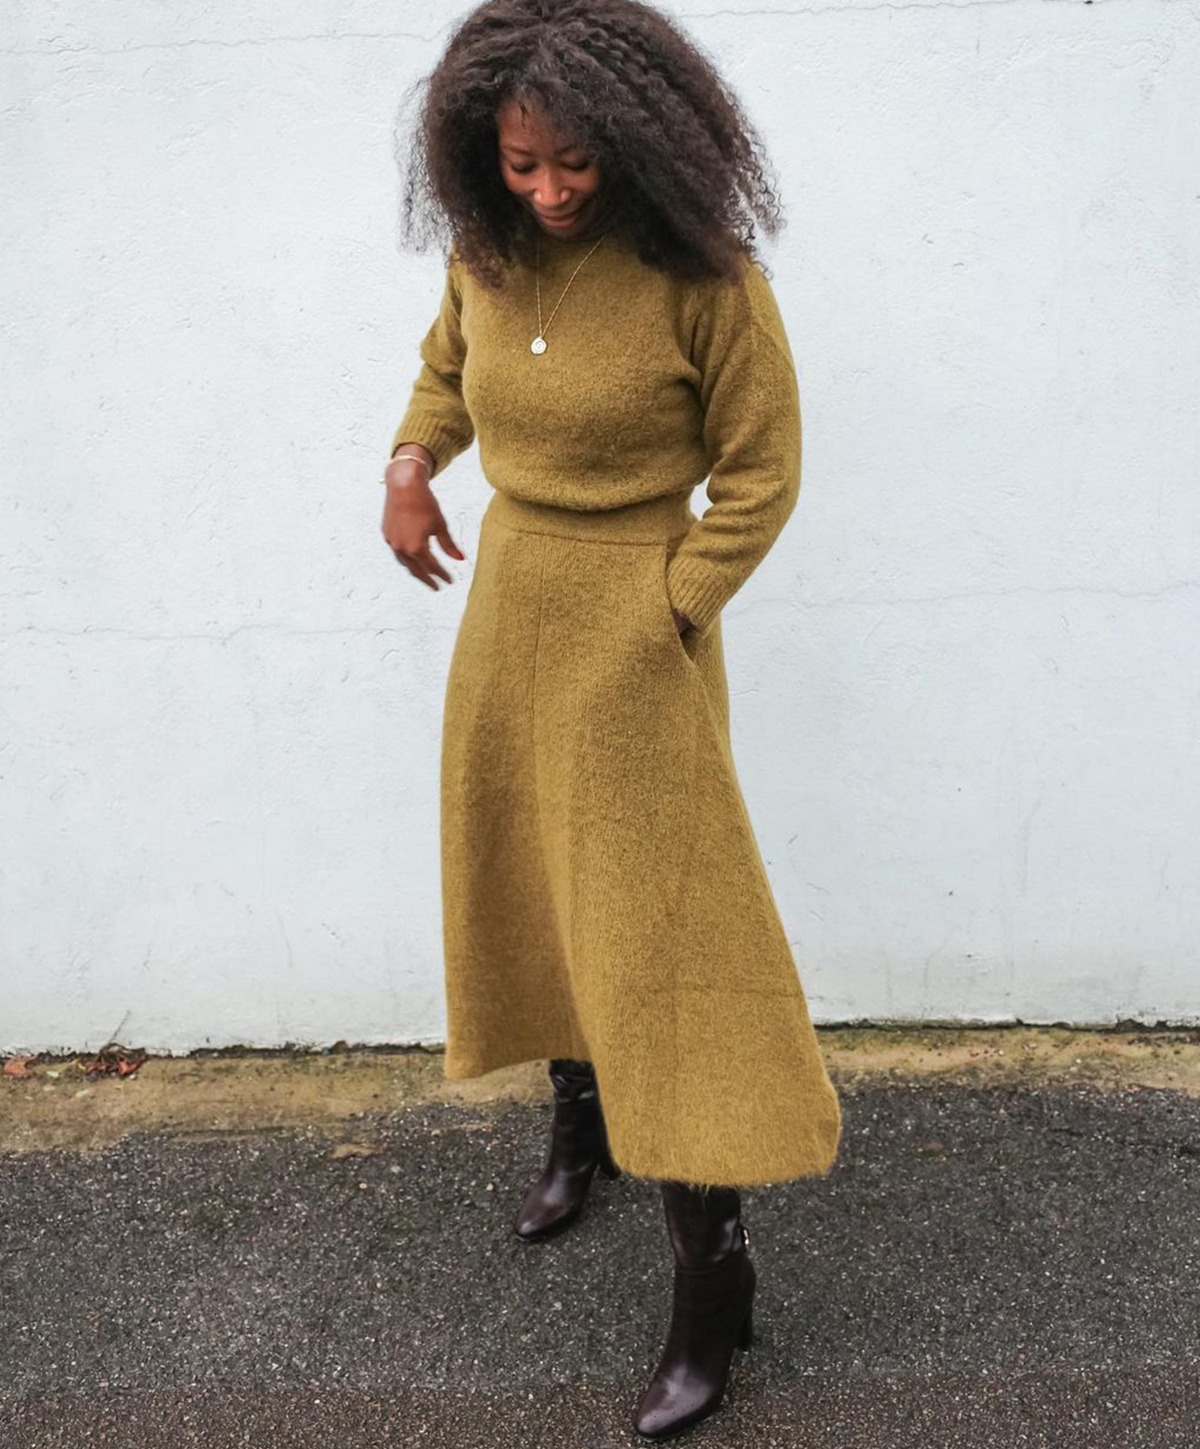 7 Interesting Winter Outfits You Can Wear for Your Weekend Walks